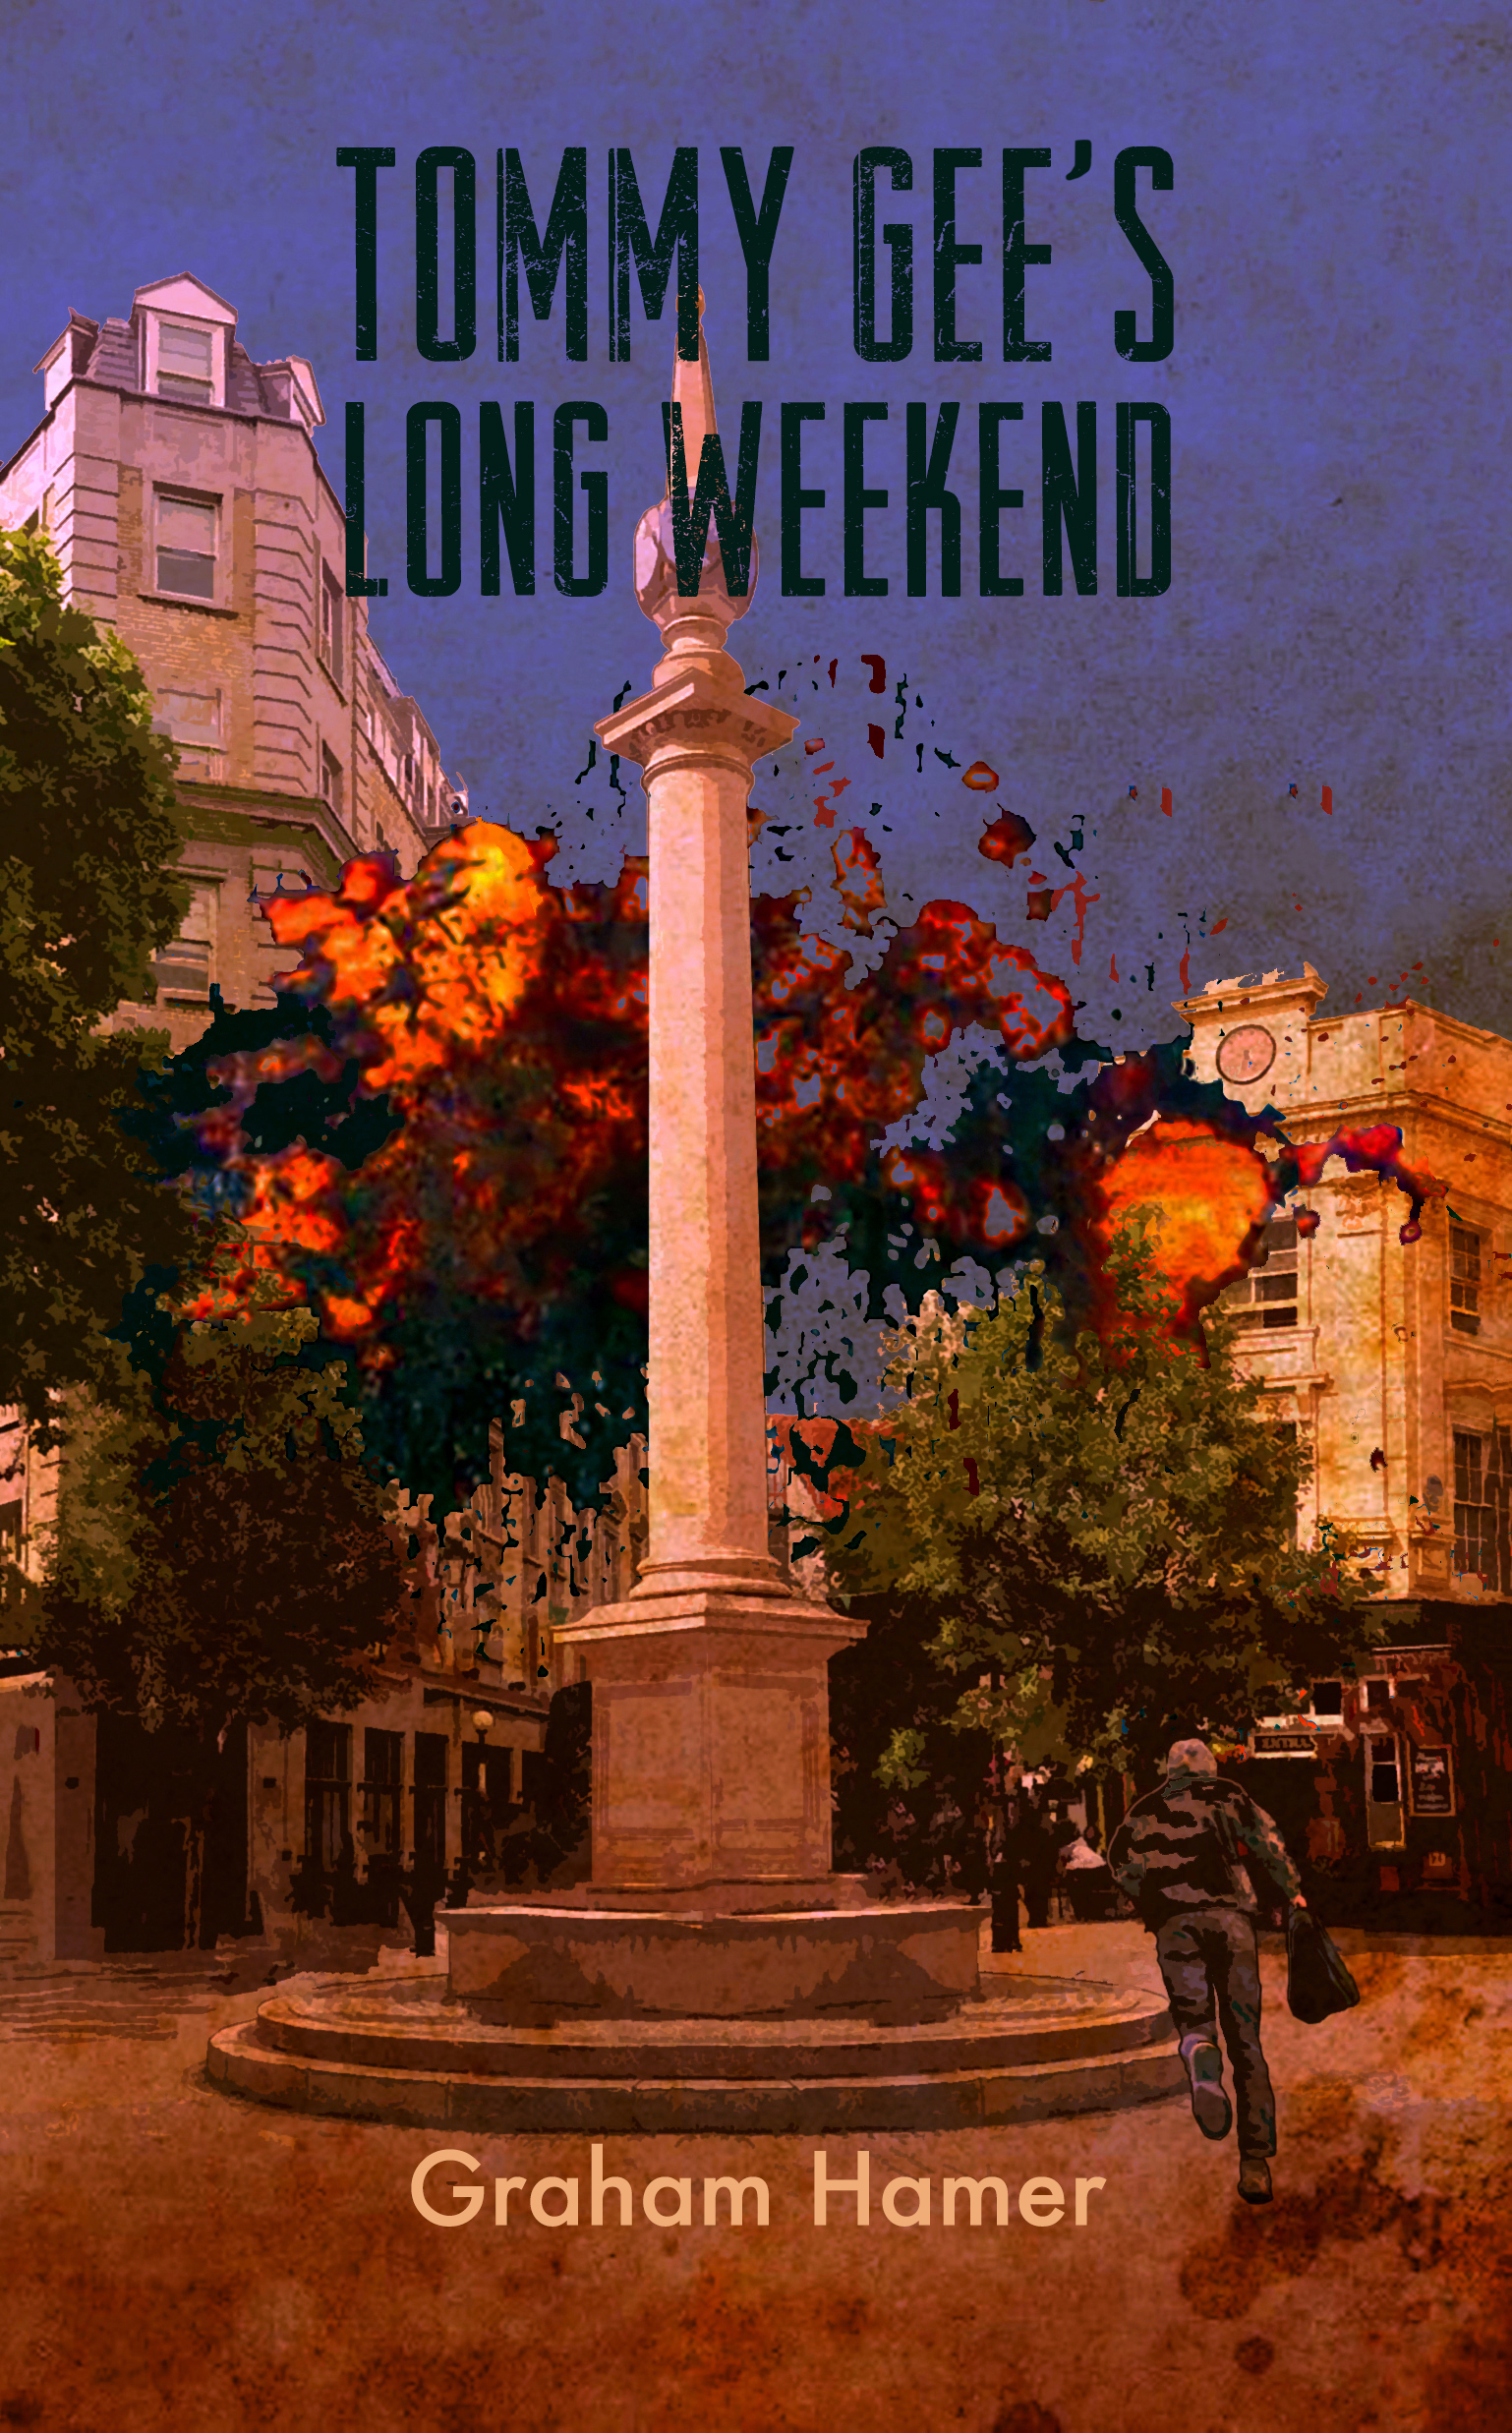 Graham Hamer's Books - Tommy Gee's Long Weekend